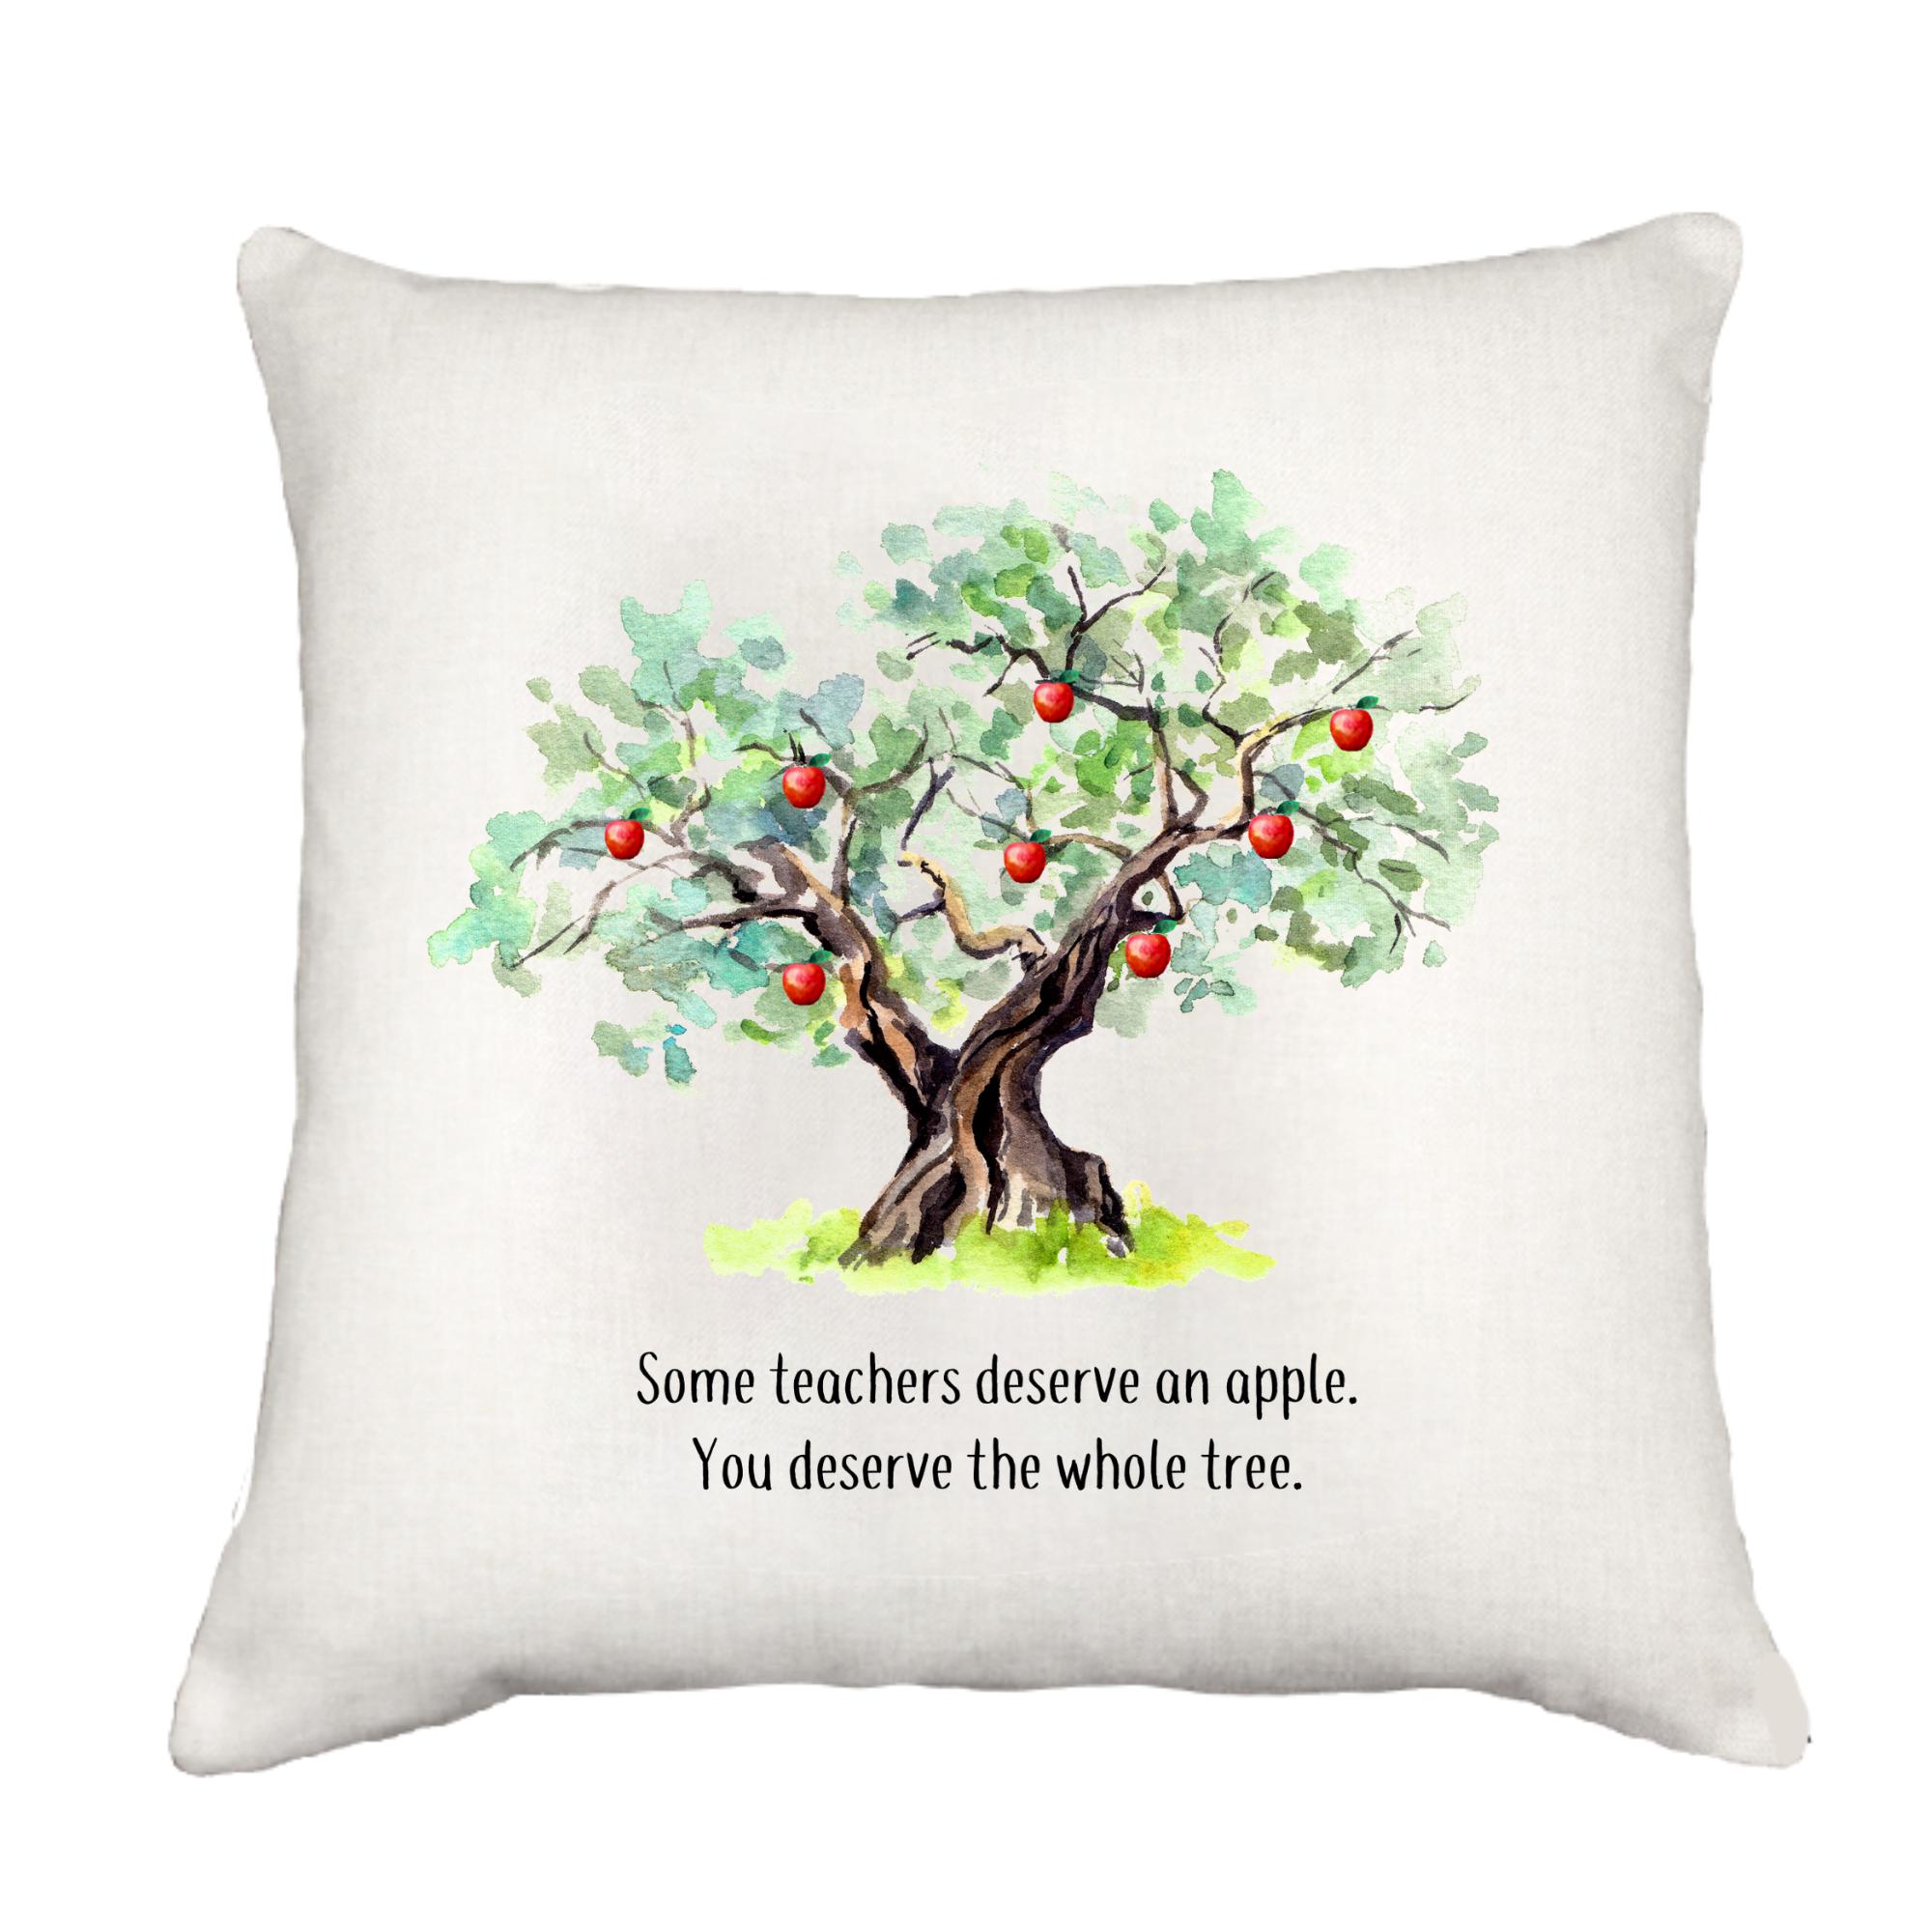 The Whole Tree Cottage Pillow Throw/Decorative Pillow - Southern Sisters